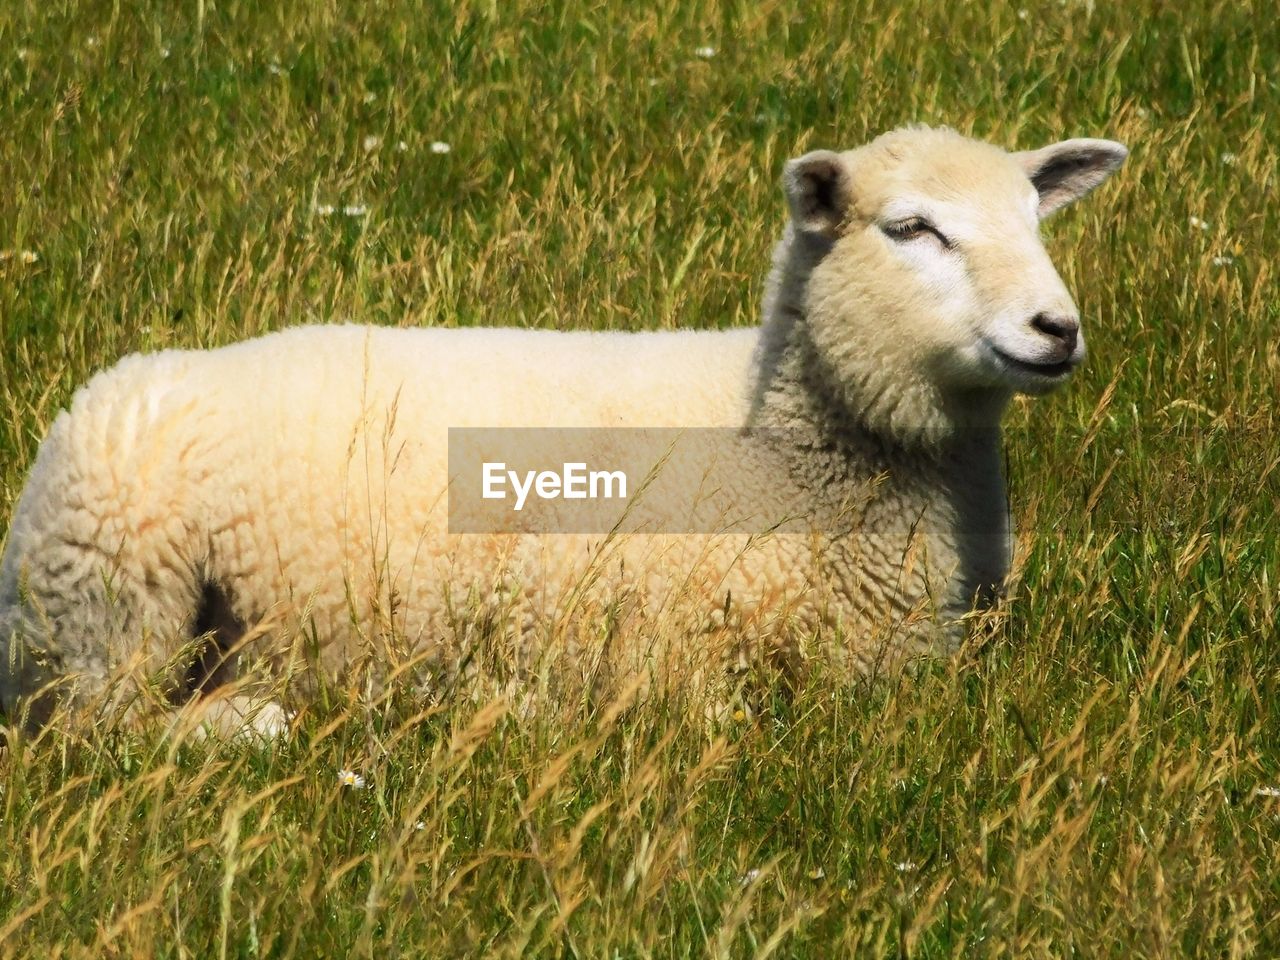 sheep, animal themes, animal, mammal, grass, pasture, plant, domestic animals, livestock, one animal, field, grassland, nature, pet, grazing, wildlife, land, no people, day, green, meadow, animal wildlife, portrait, outdoors, lamb, growth, relaxation, sunlight, agriculture, herbivorous, wool, young animal